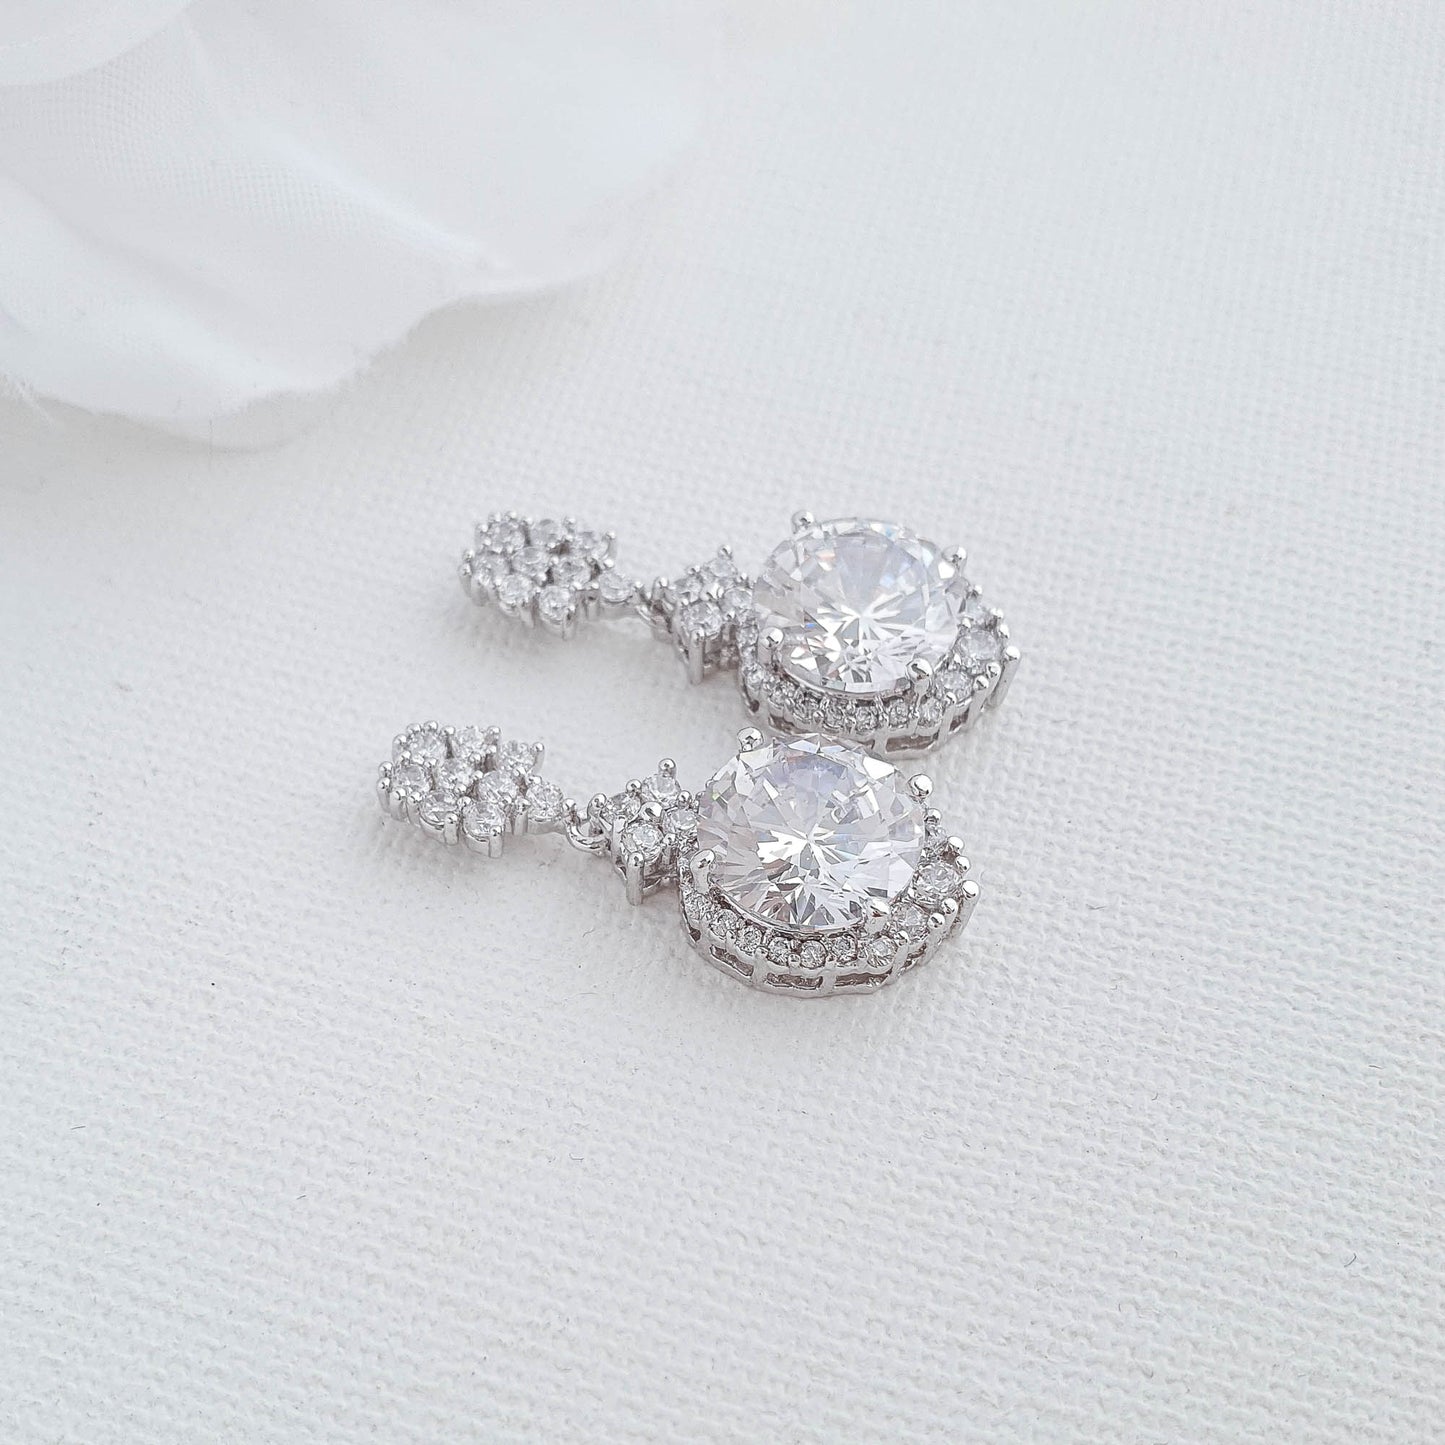 Drop Earrings for Brides and Wedding Guests-Mandy